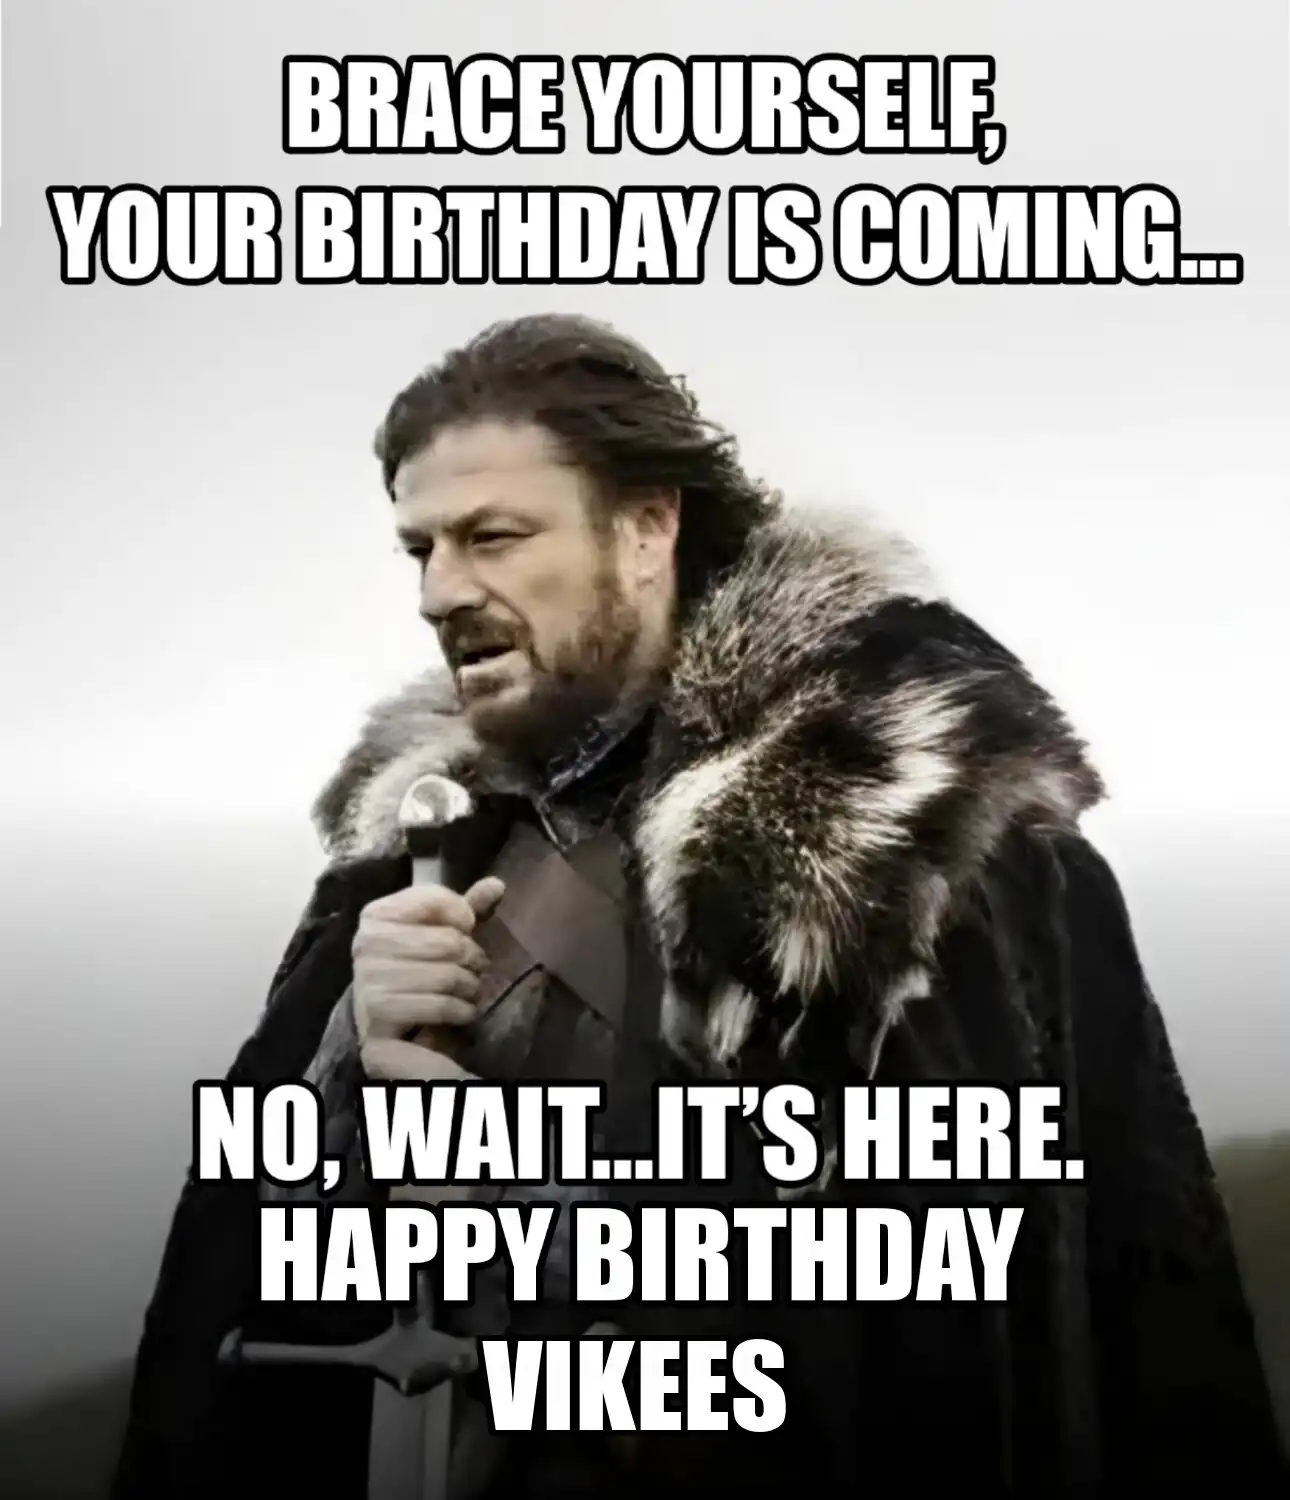 Happy Birthday Vikees Brace Yourself Your Birthday Is Coming Meme